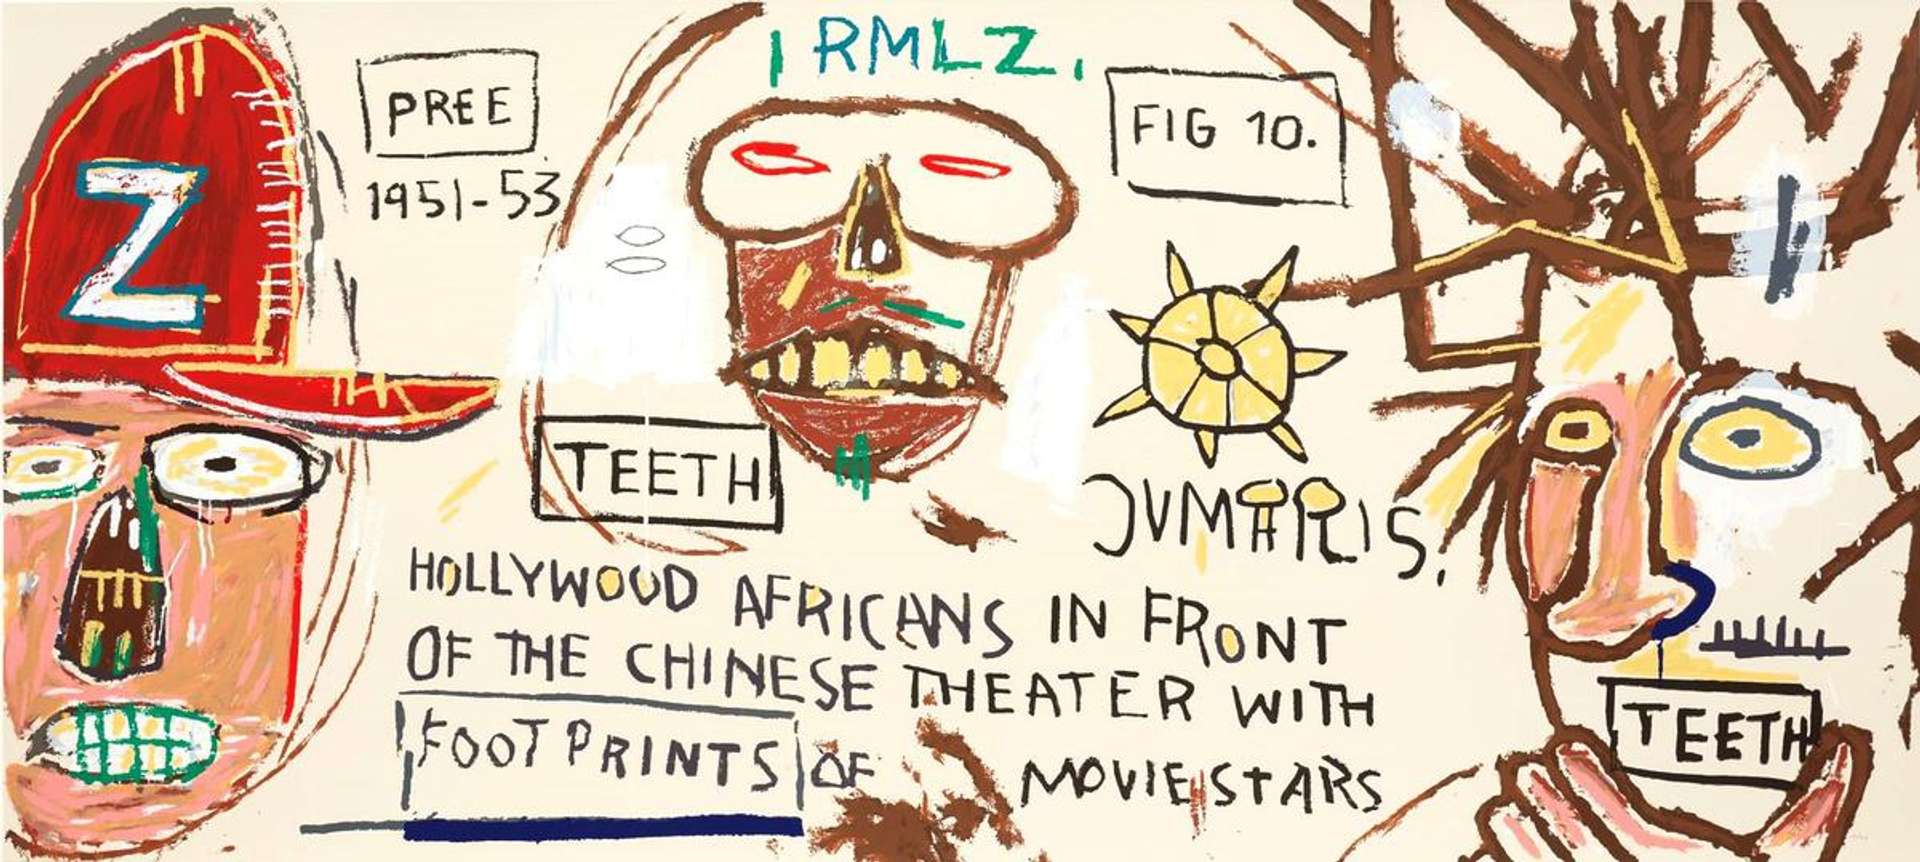 Jean-Michel Basquiat: Hollywood Africans In Front Of The Chinese Theatre With Footprints Of Movie Stars - Unsigned Print